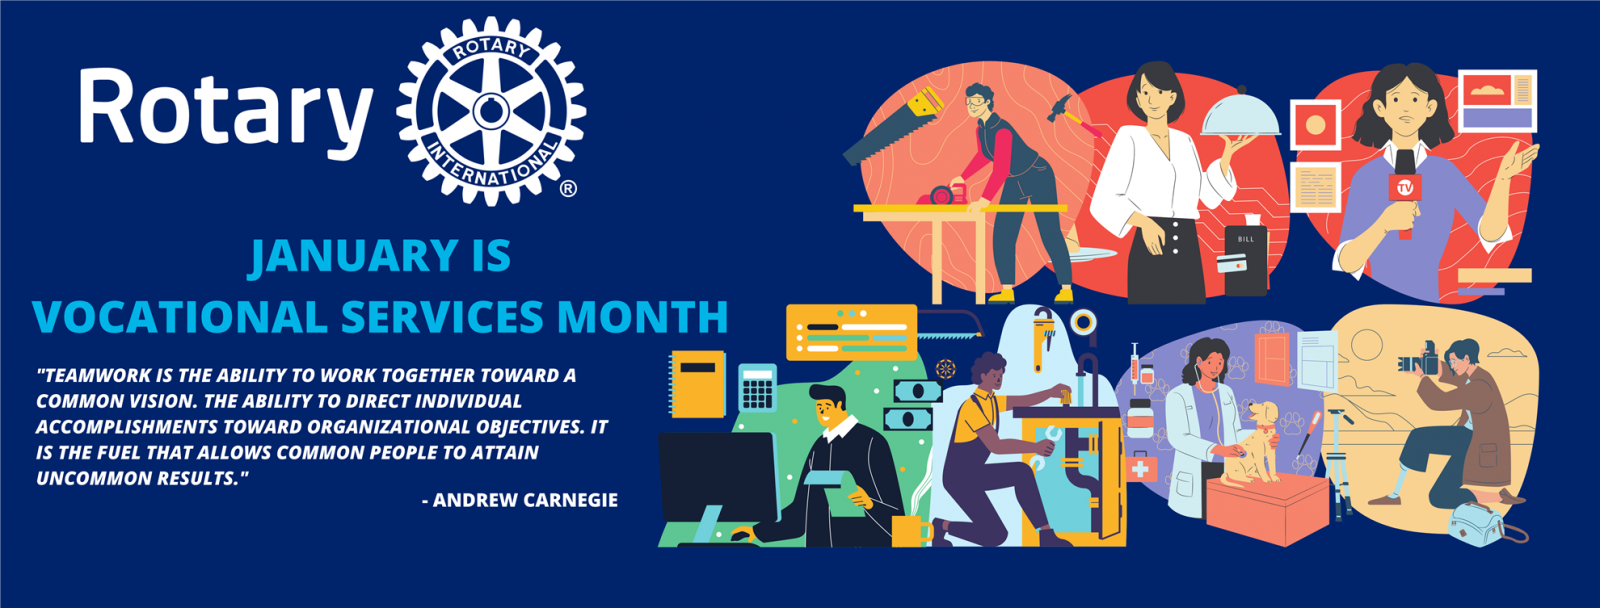 January is Vocational Service Month | Rotary District 6440